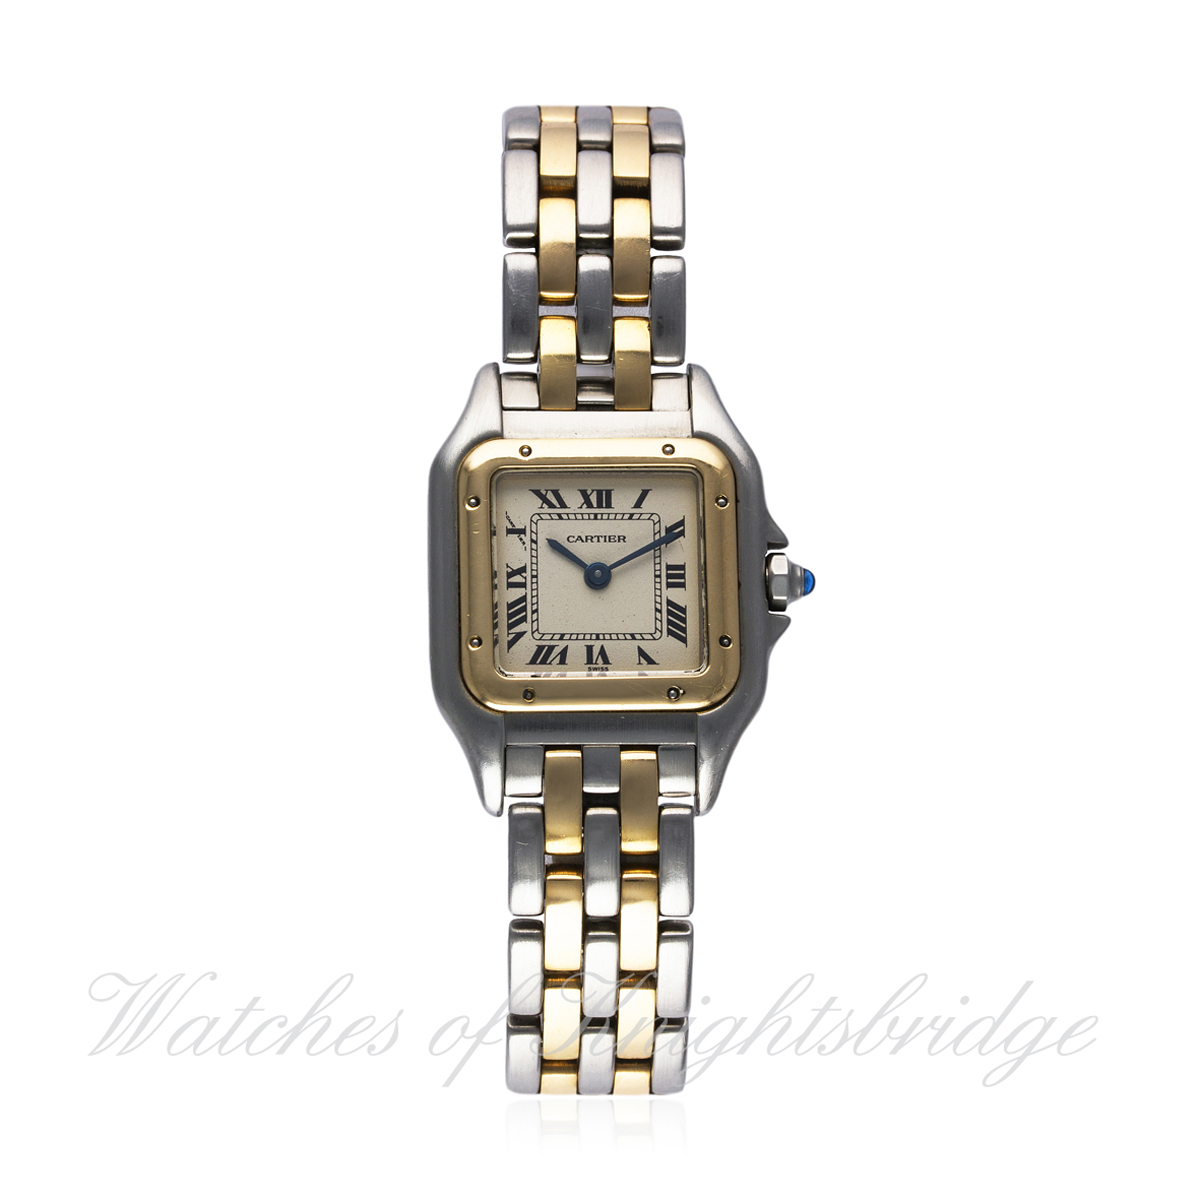 A LADIES STEEL & GOLD CARTIER PANTHERE BRACELET WATCH CIRCA 1990s, REF. 1120 D: Silver dial with